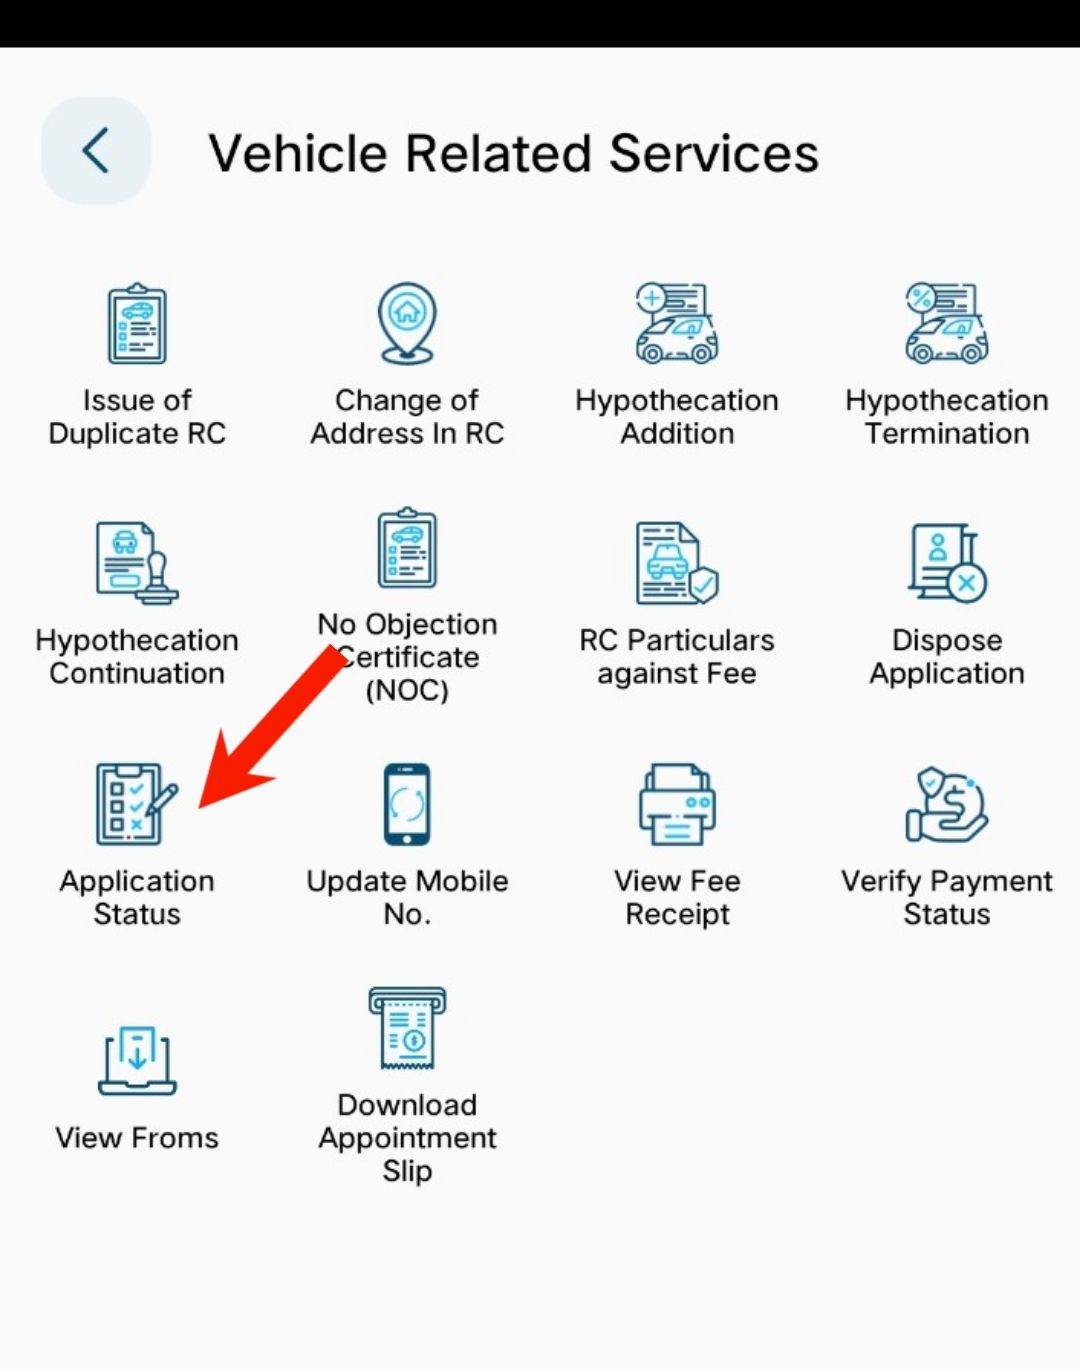 Vehicle Related Services